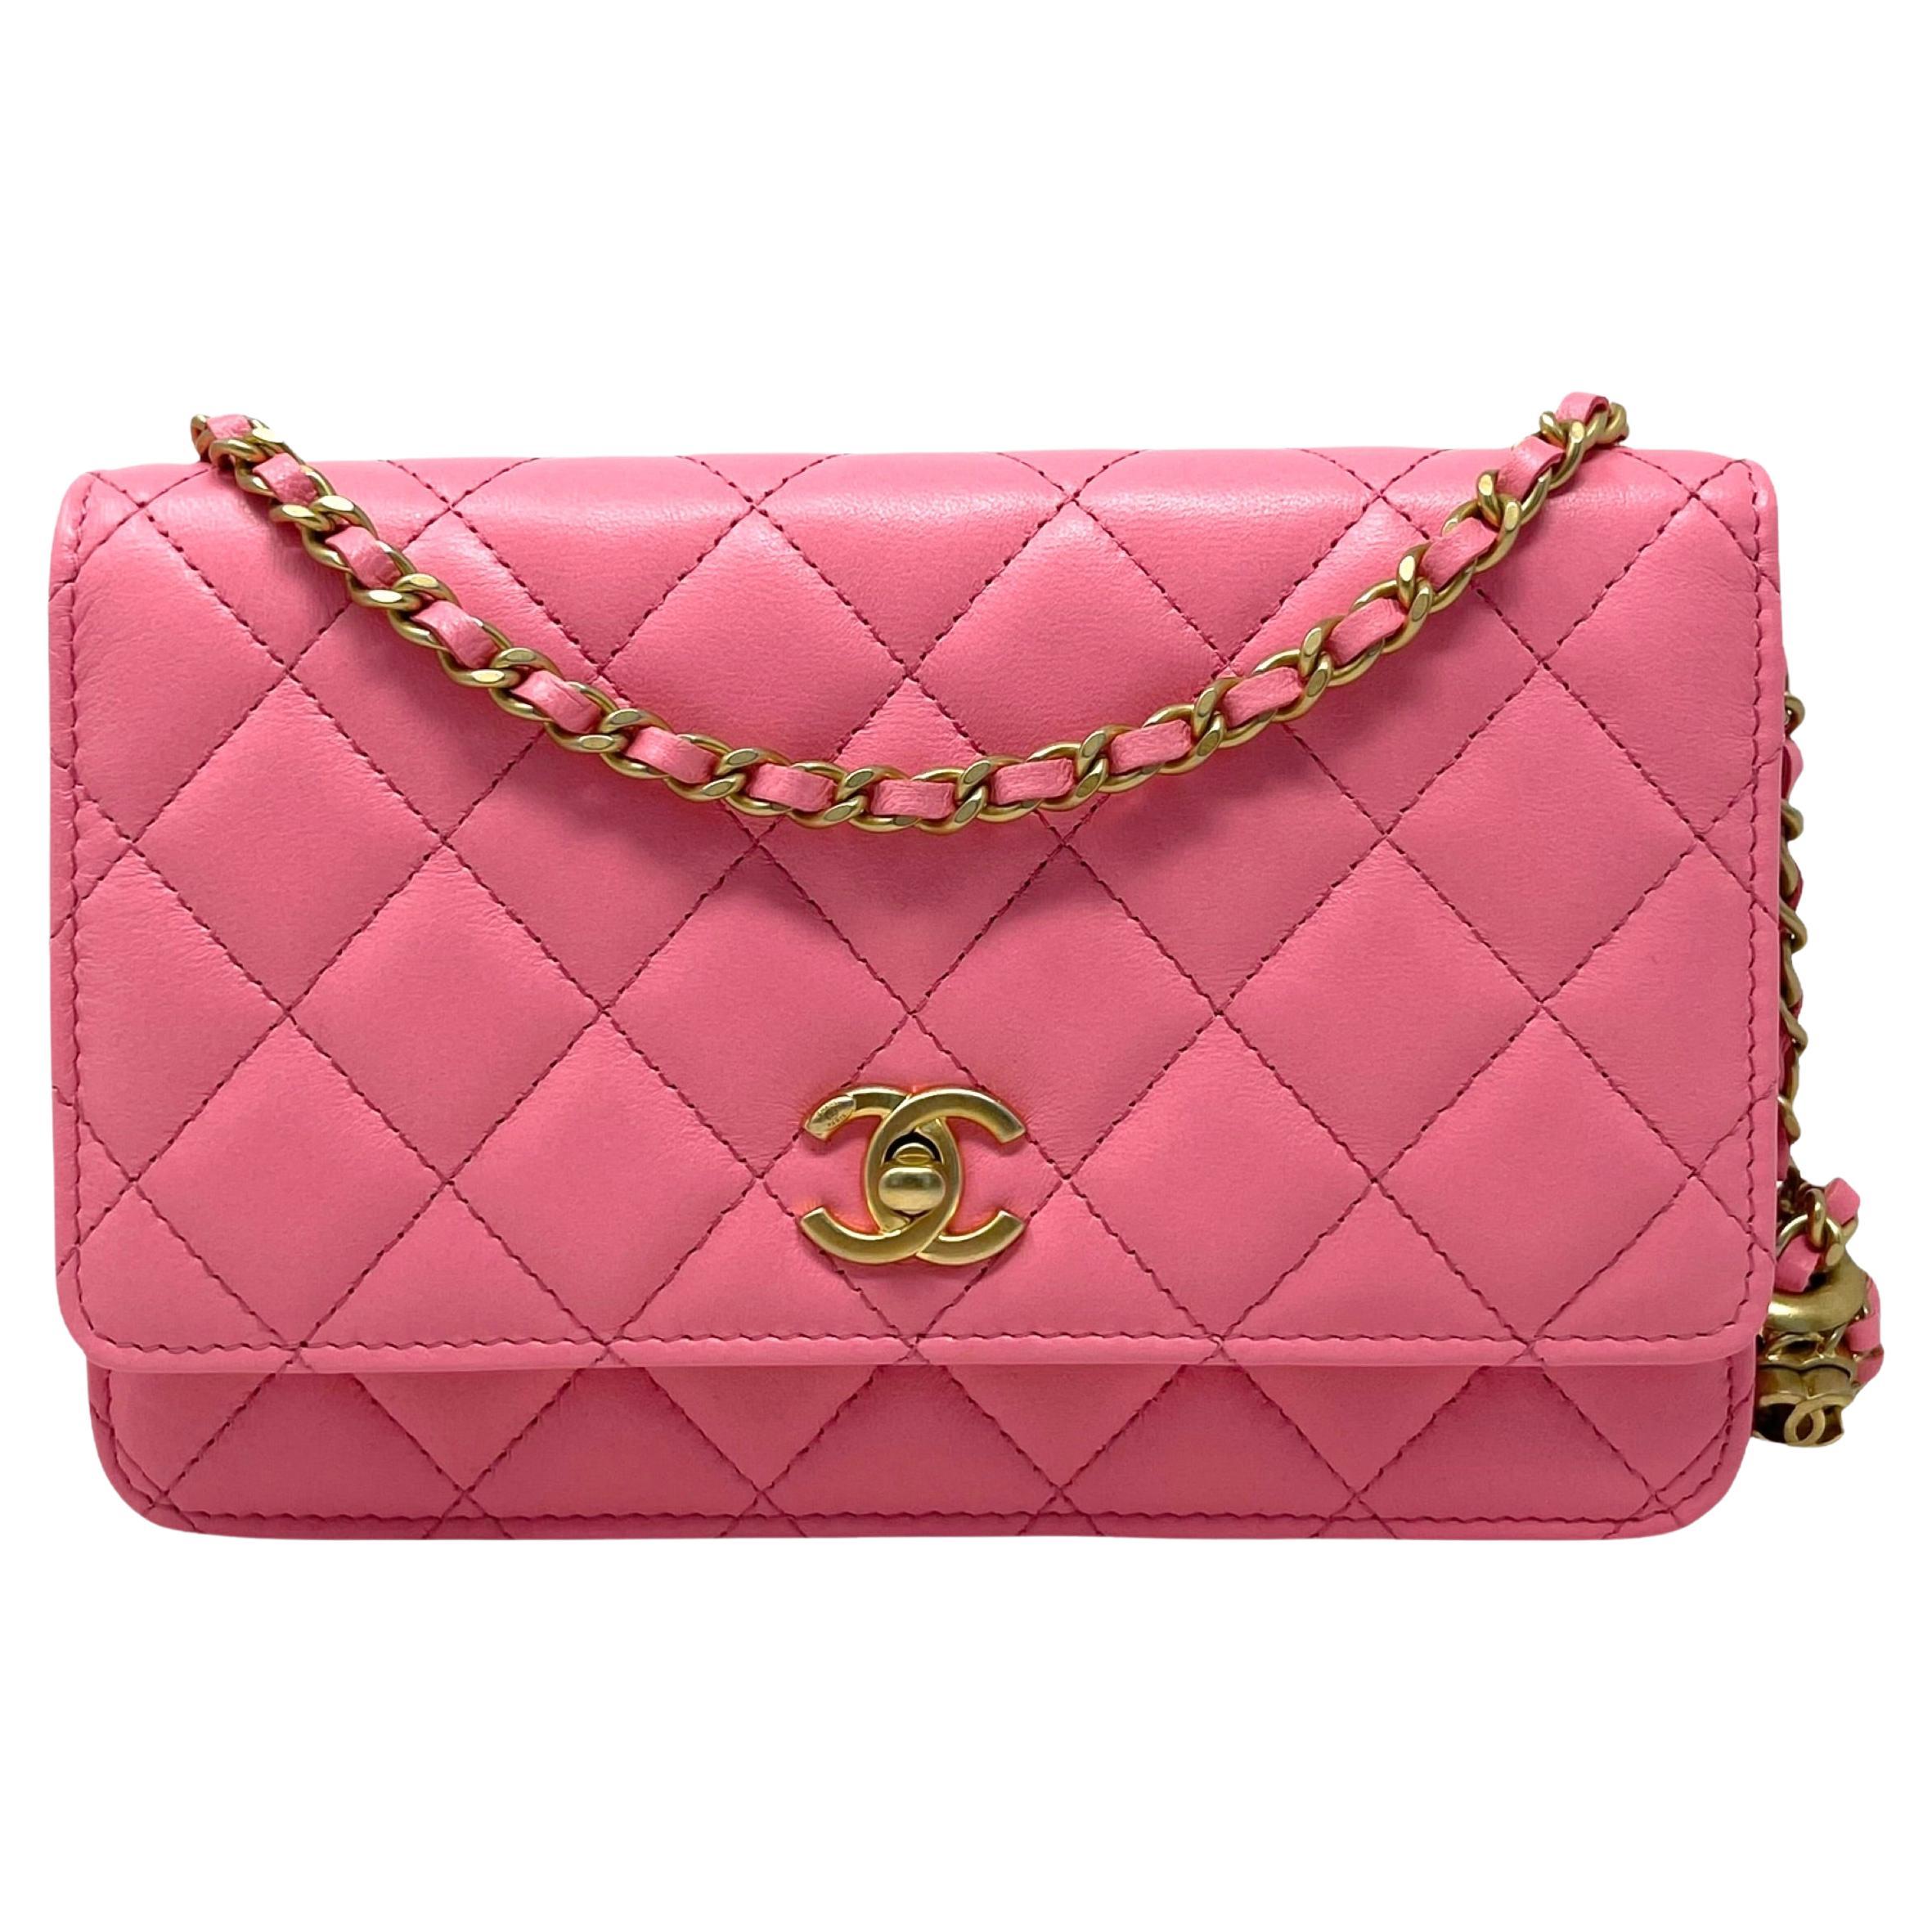 NEW Chanel Pink Classic Quilted Lambskin Leather Wallet on a Chain Crossbody Bag For Sale